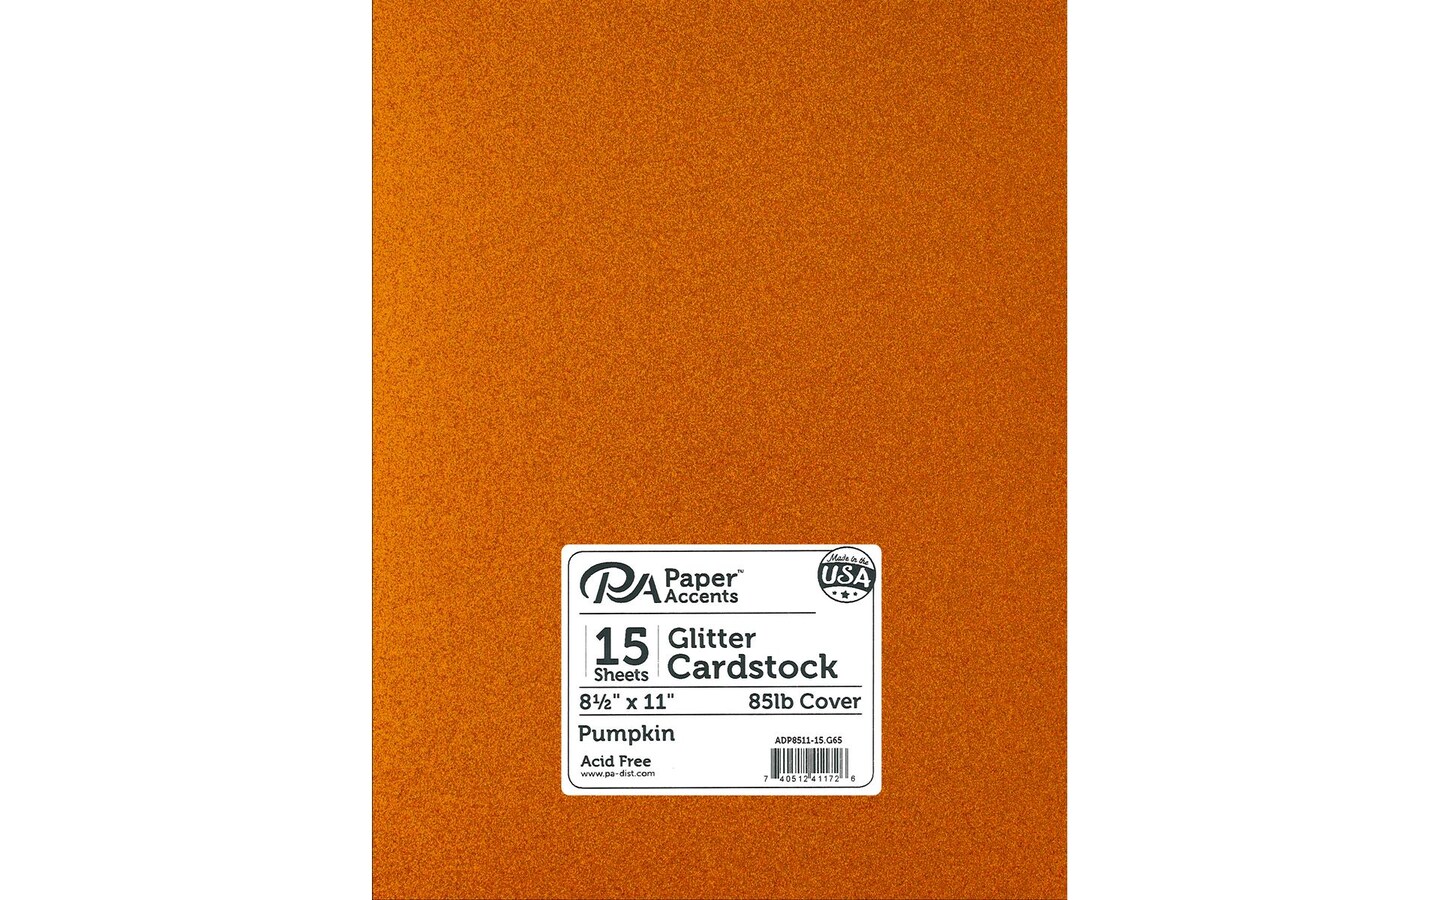 PA Paper Accents Glitter Cardstock 8.5&#x22; x 11&#x22; Pumpkin, 85lb colored cardstock paper for card making, scrapbooking, printing, quilling and crafts, 15 piece pack